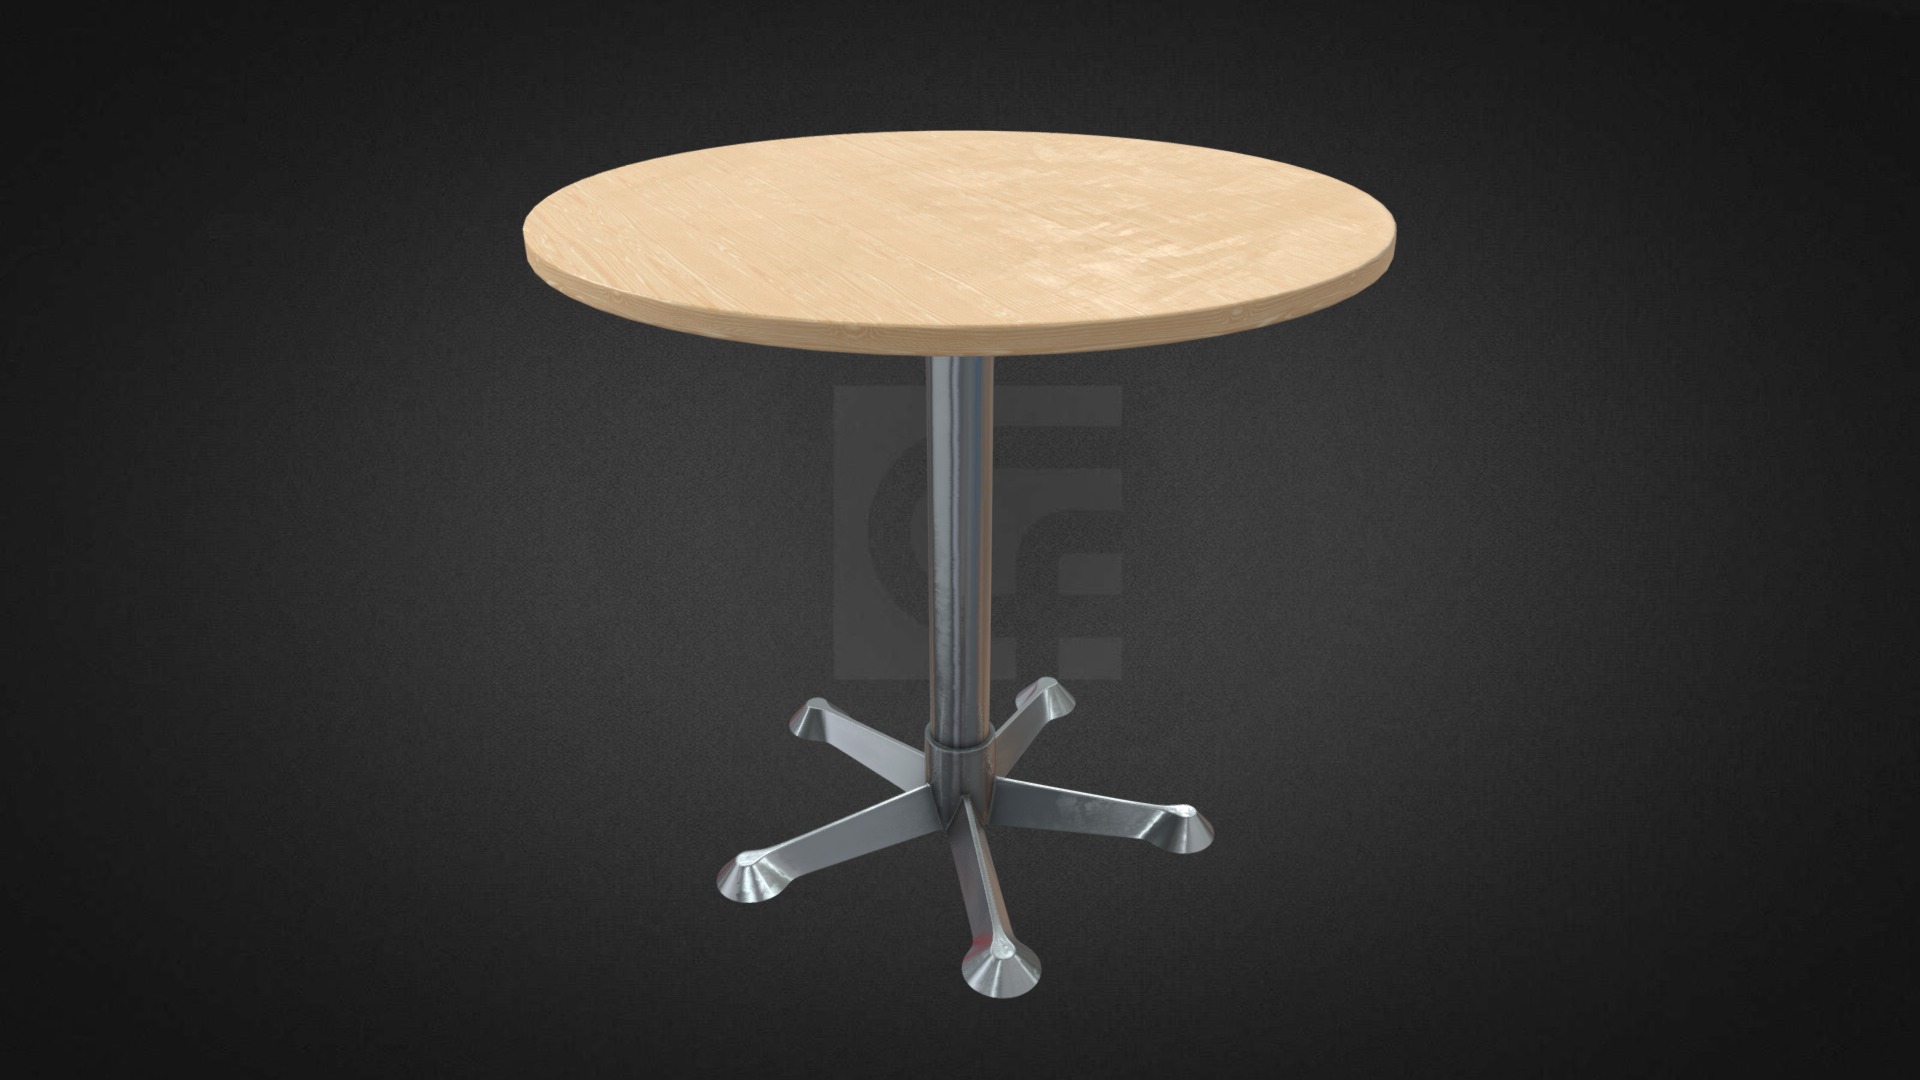 3D model Cross Table Hire - This is a 3D model of the Cross Table Hire. The 3D model is about a table with a lamp shade.